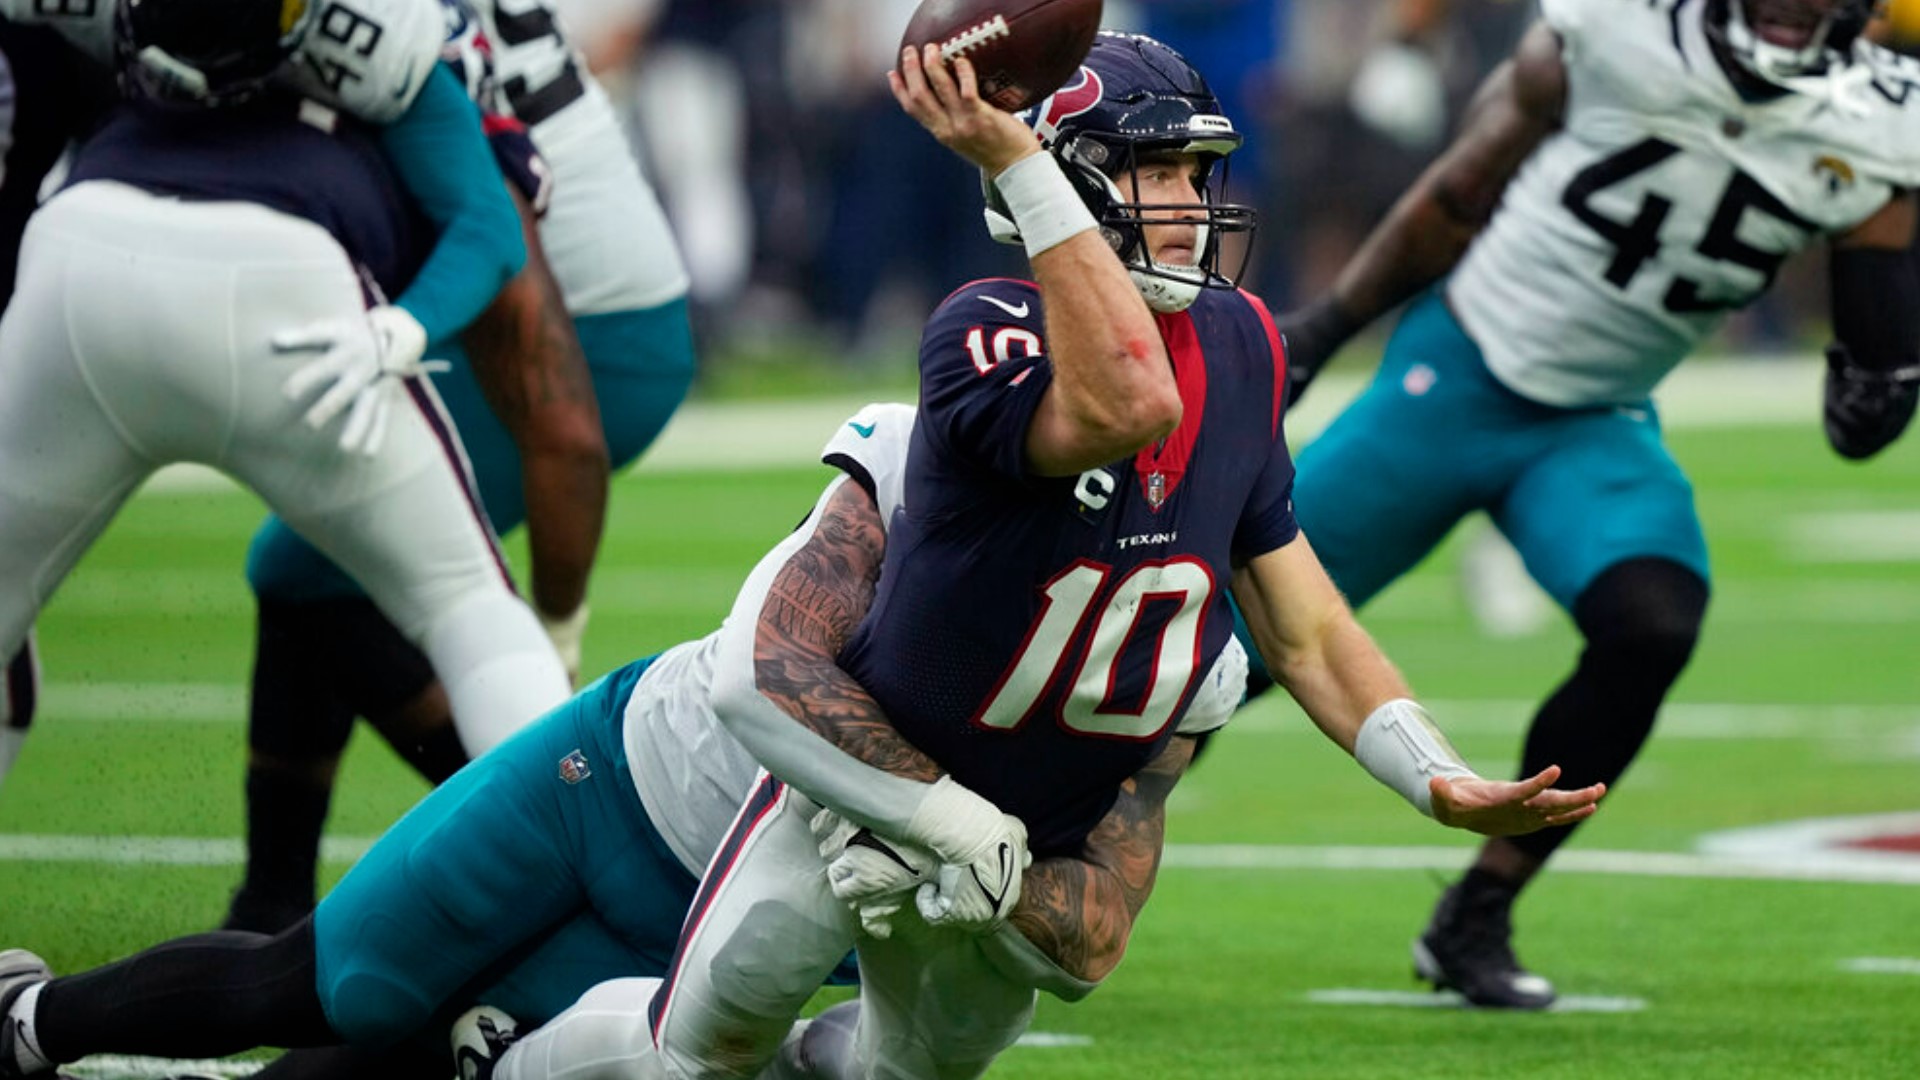 The Texans lost every game at home this season, excpet for the first one, which was a tie.